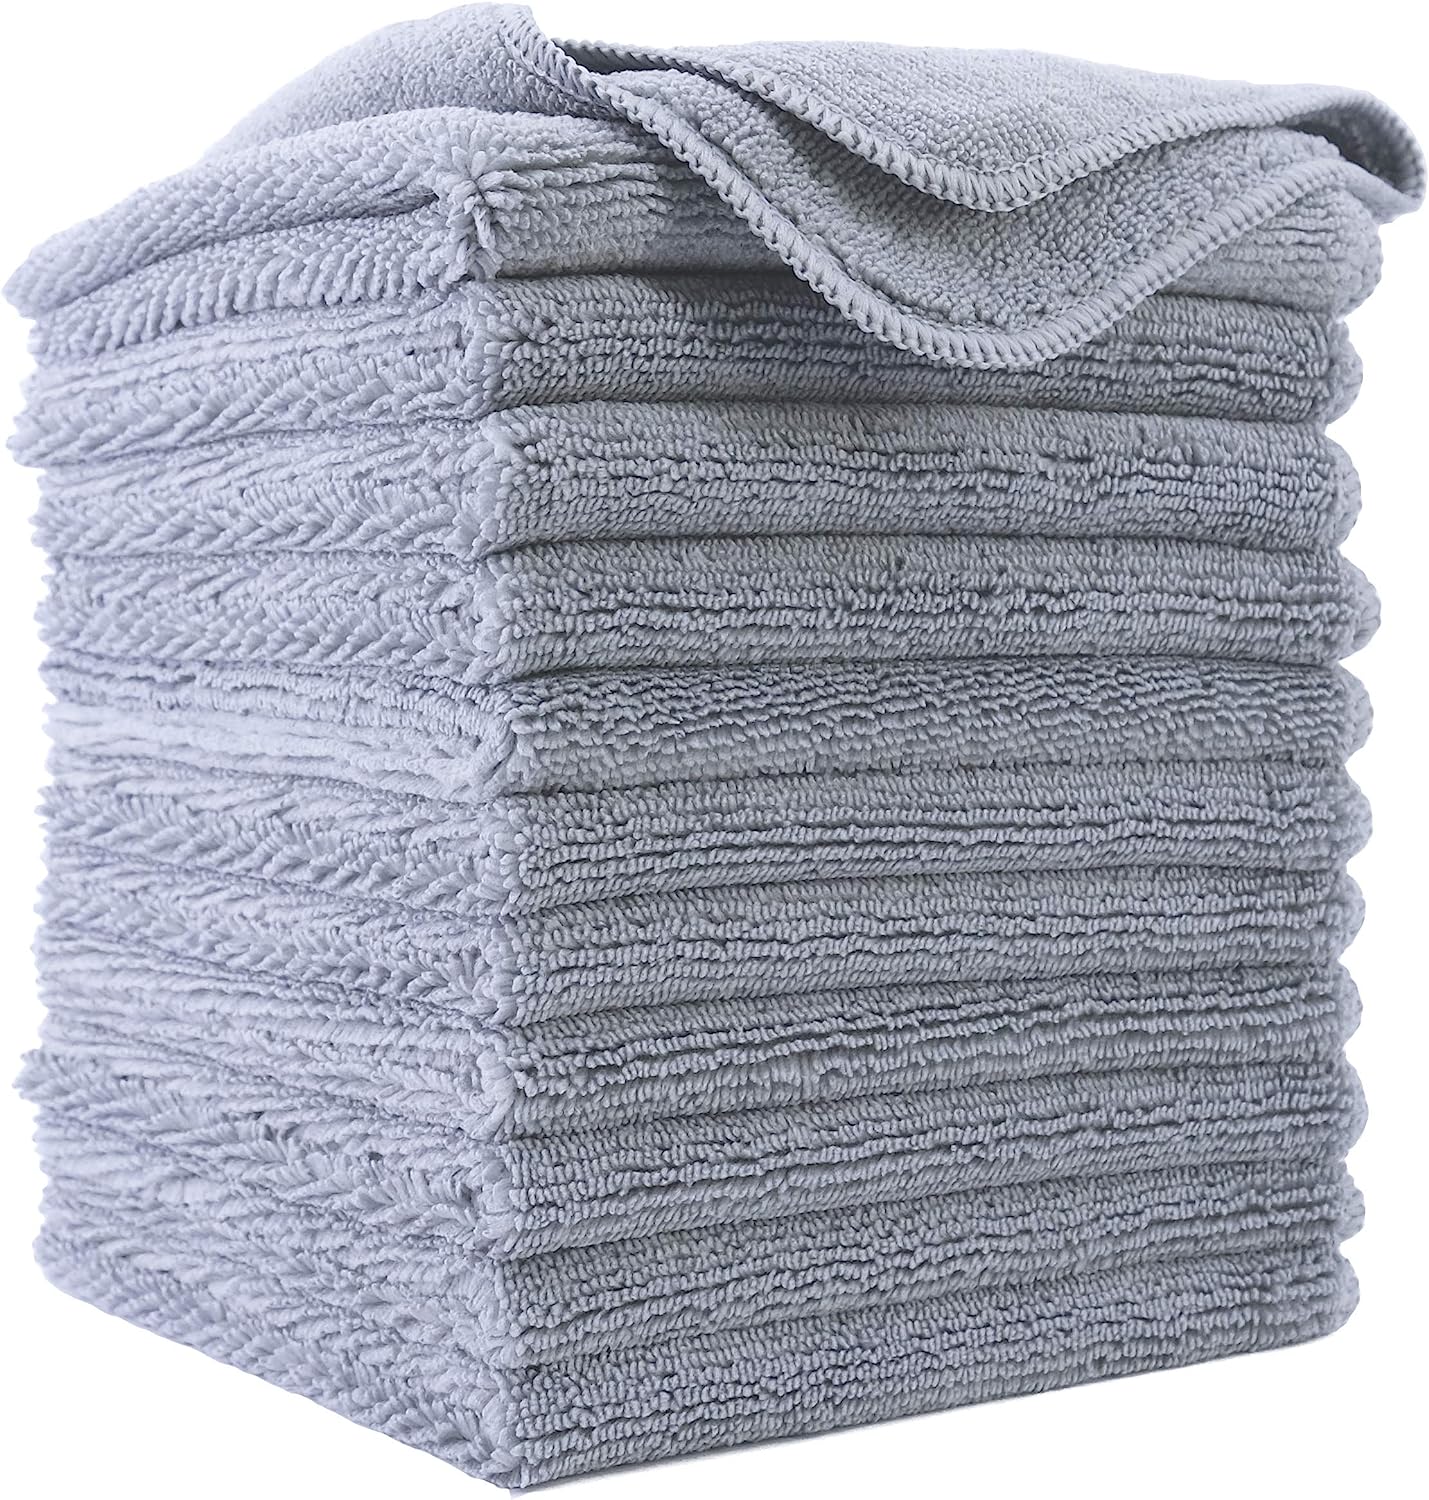 Microfiber Cleaning Cloth 12 in. x 12 in., 12-Pack